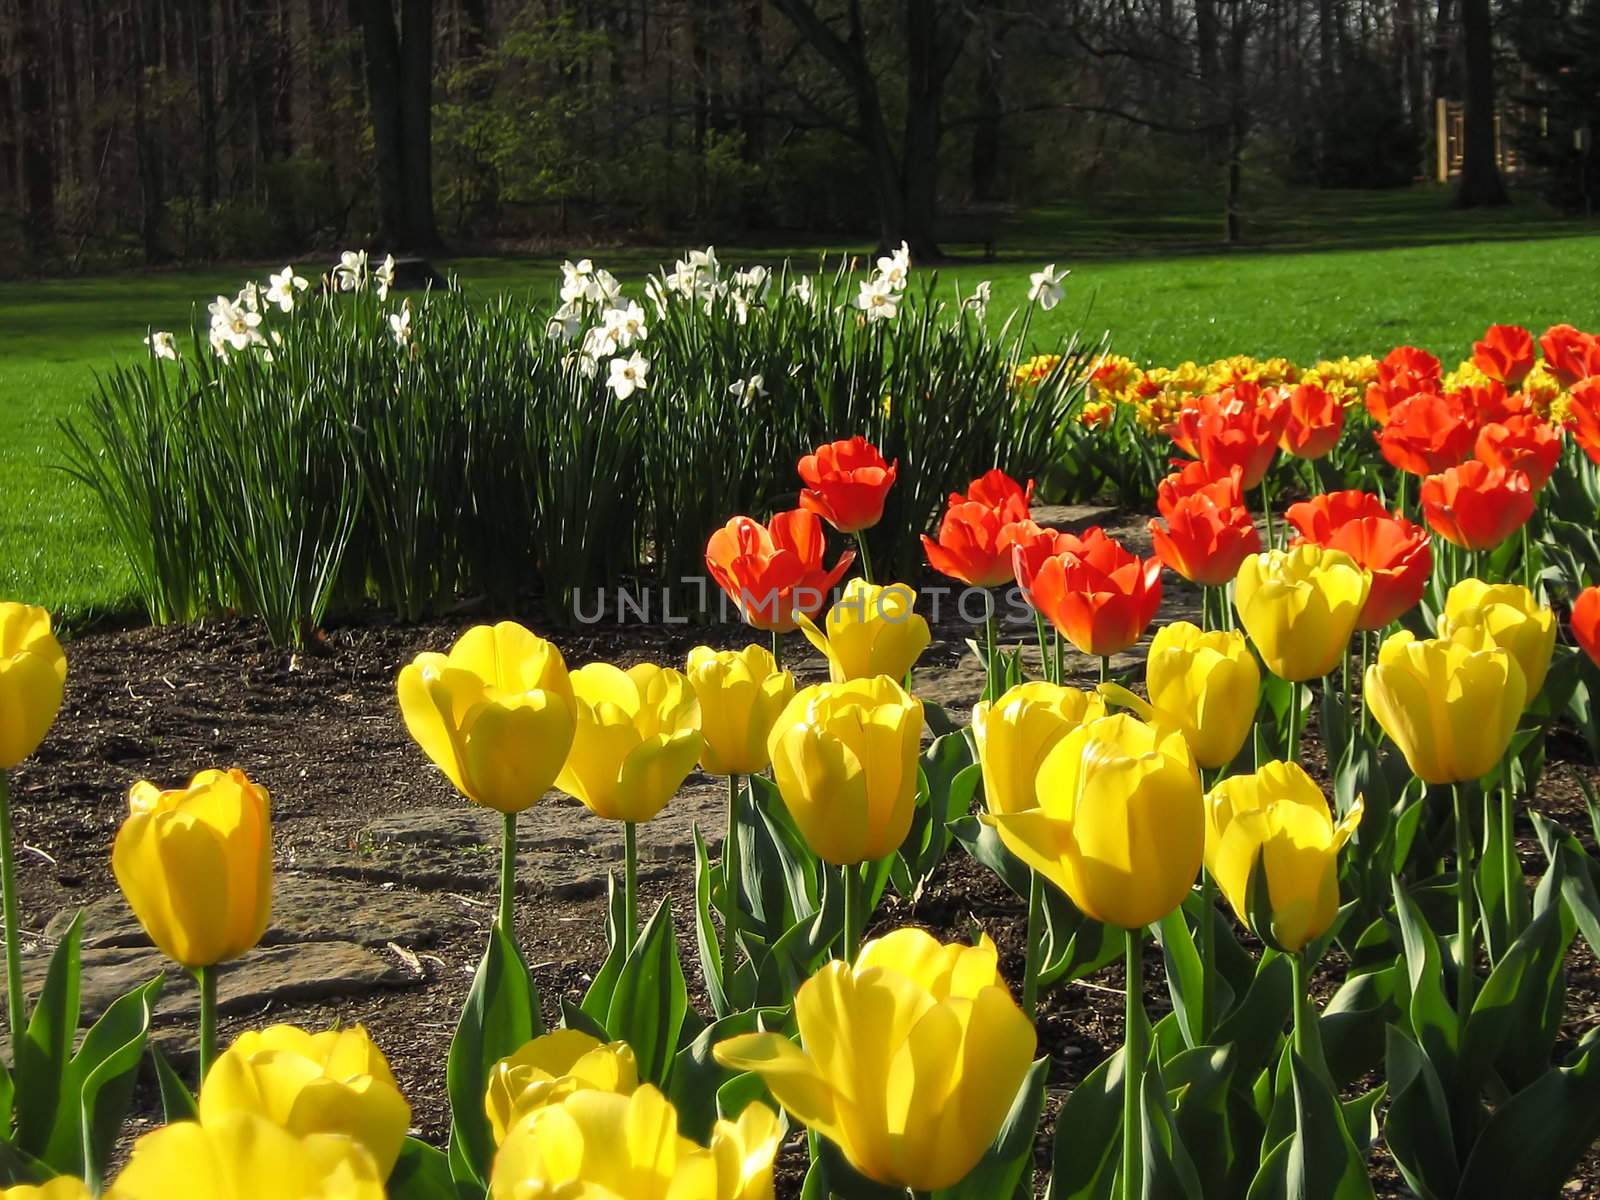 A photograph of tulips and narcissus blooming in a garden.